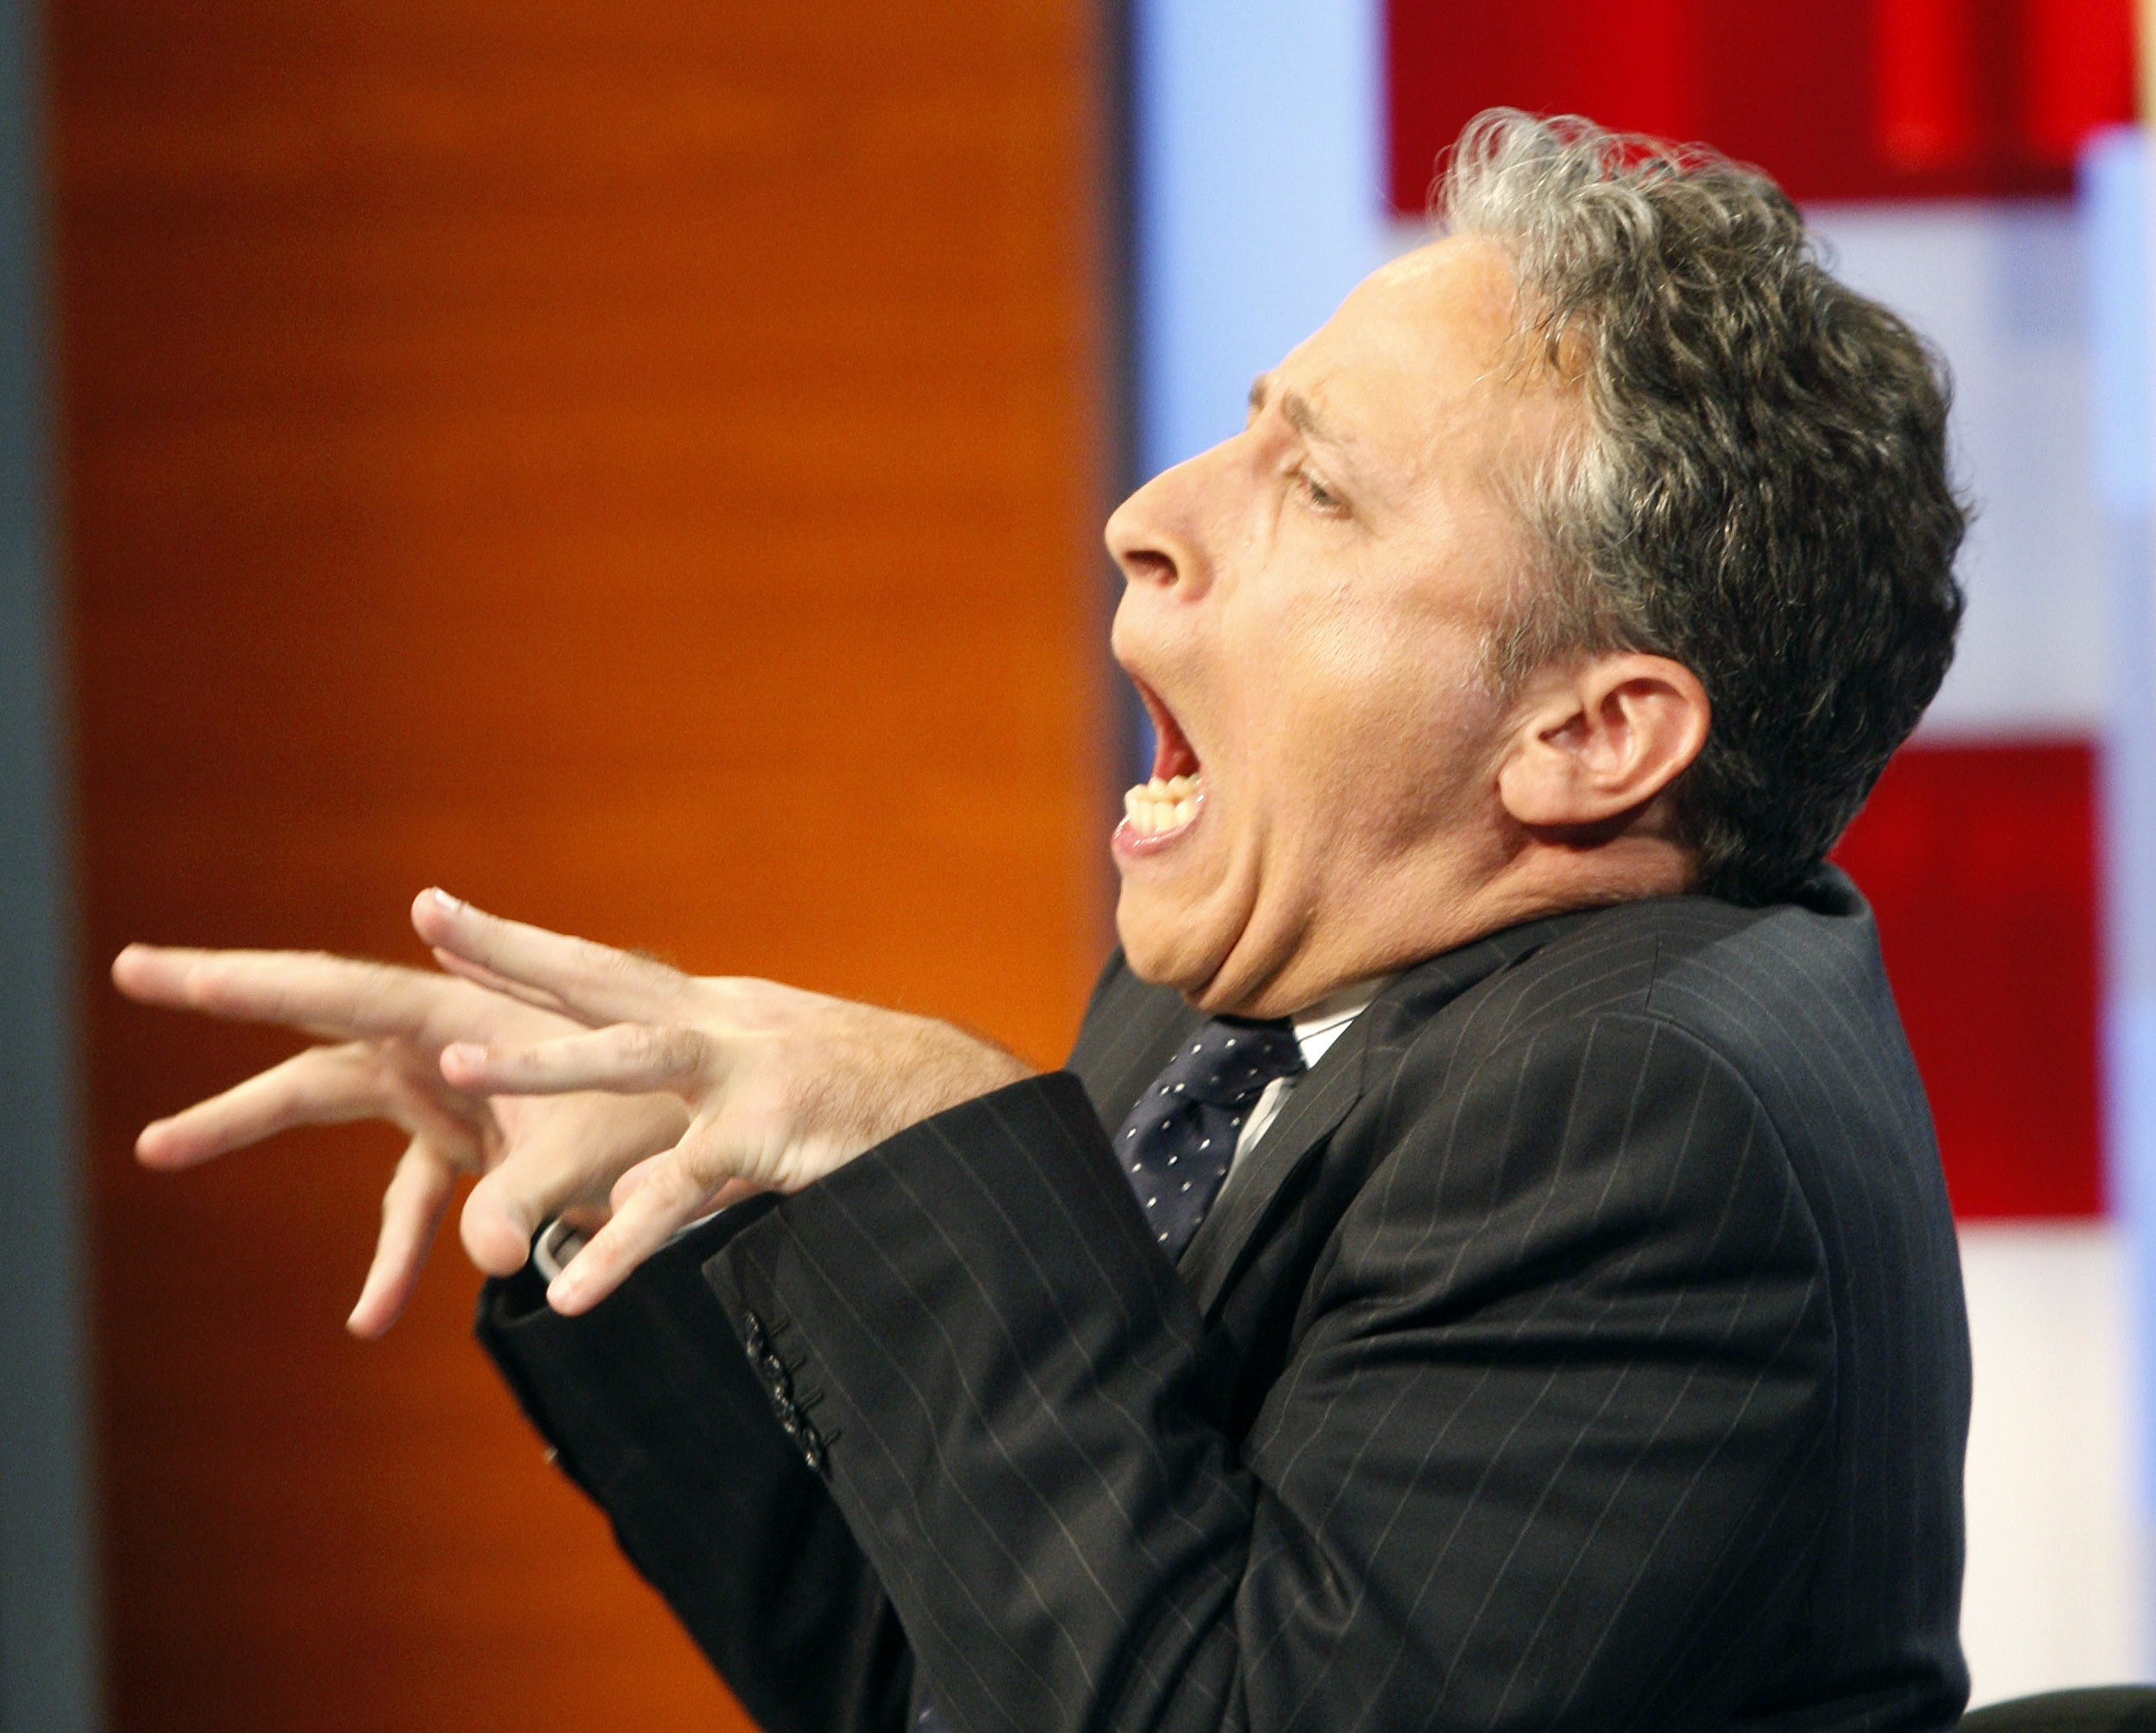 Tracing Jon Stewart's Trail Of Destruction And Evisceration